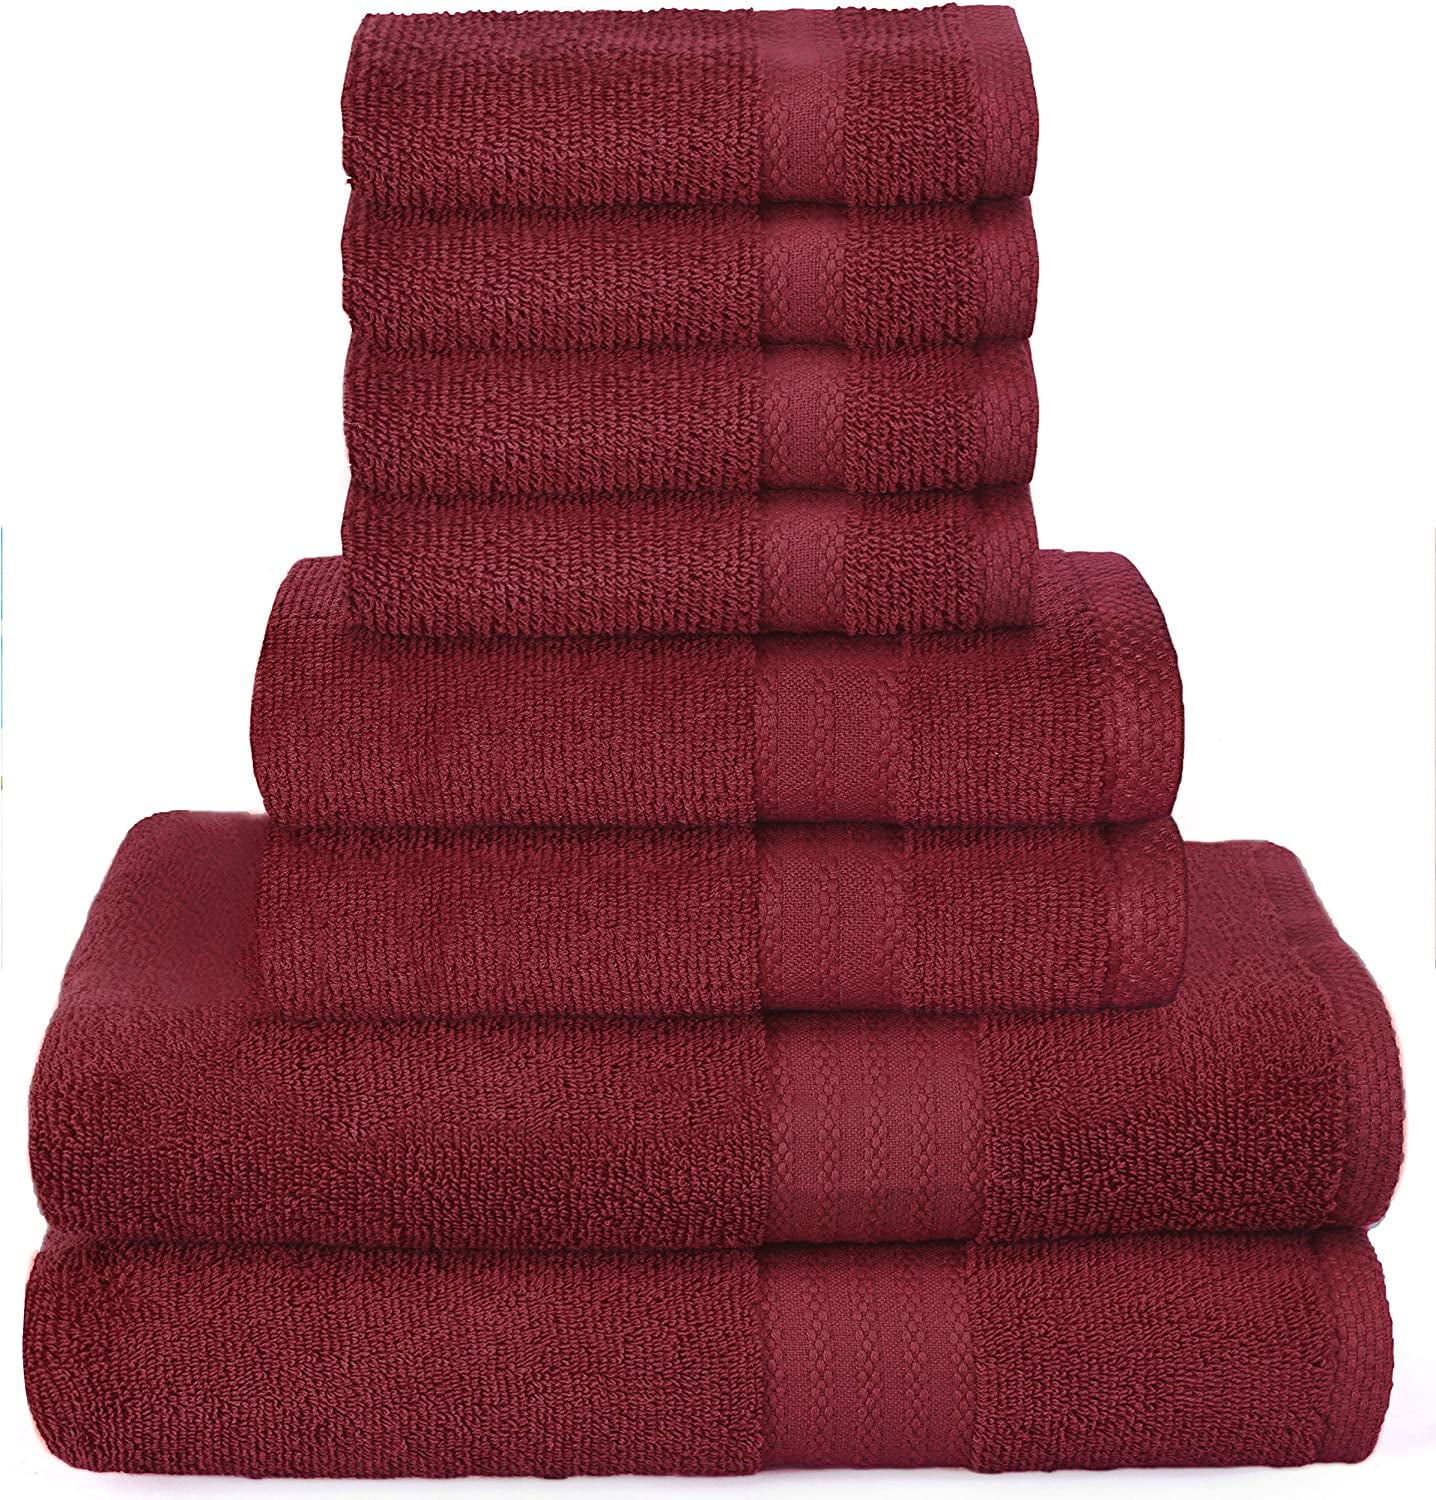 Oversized Red Hand Towel